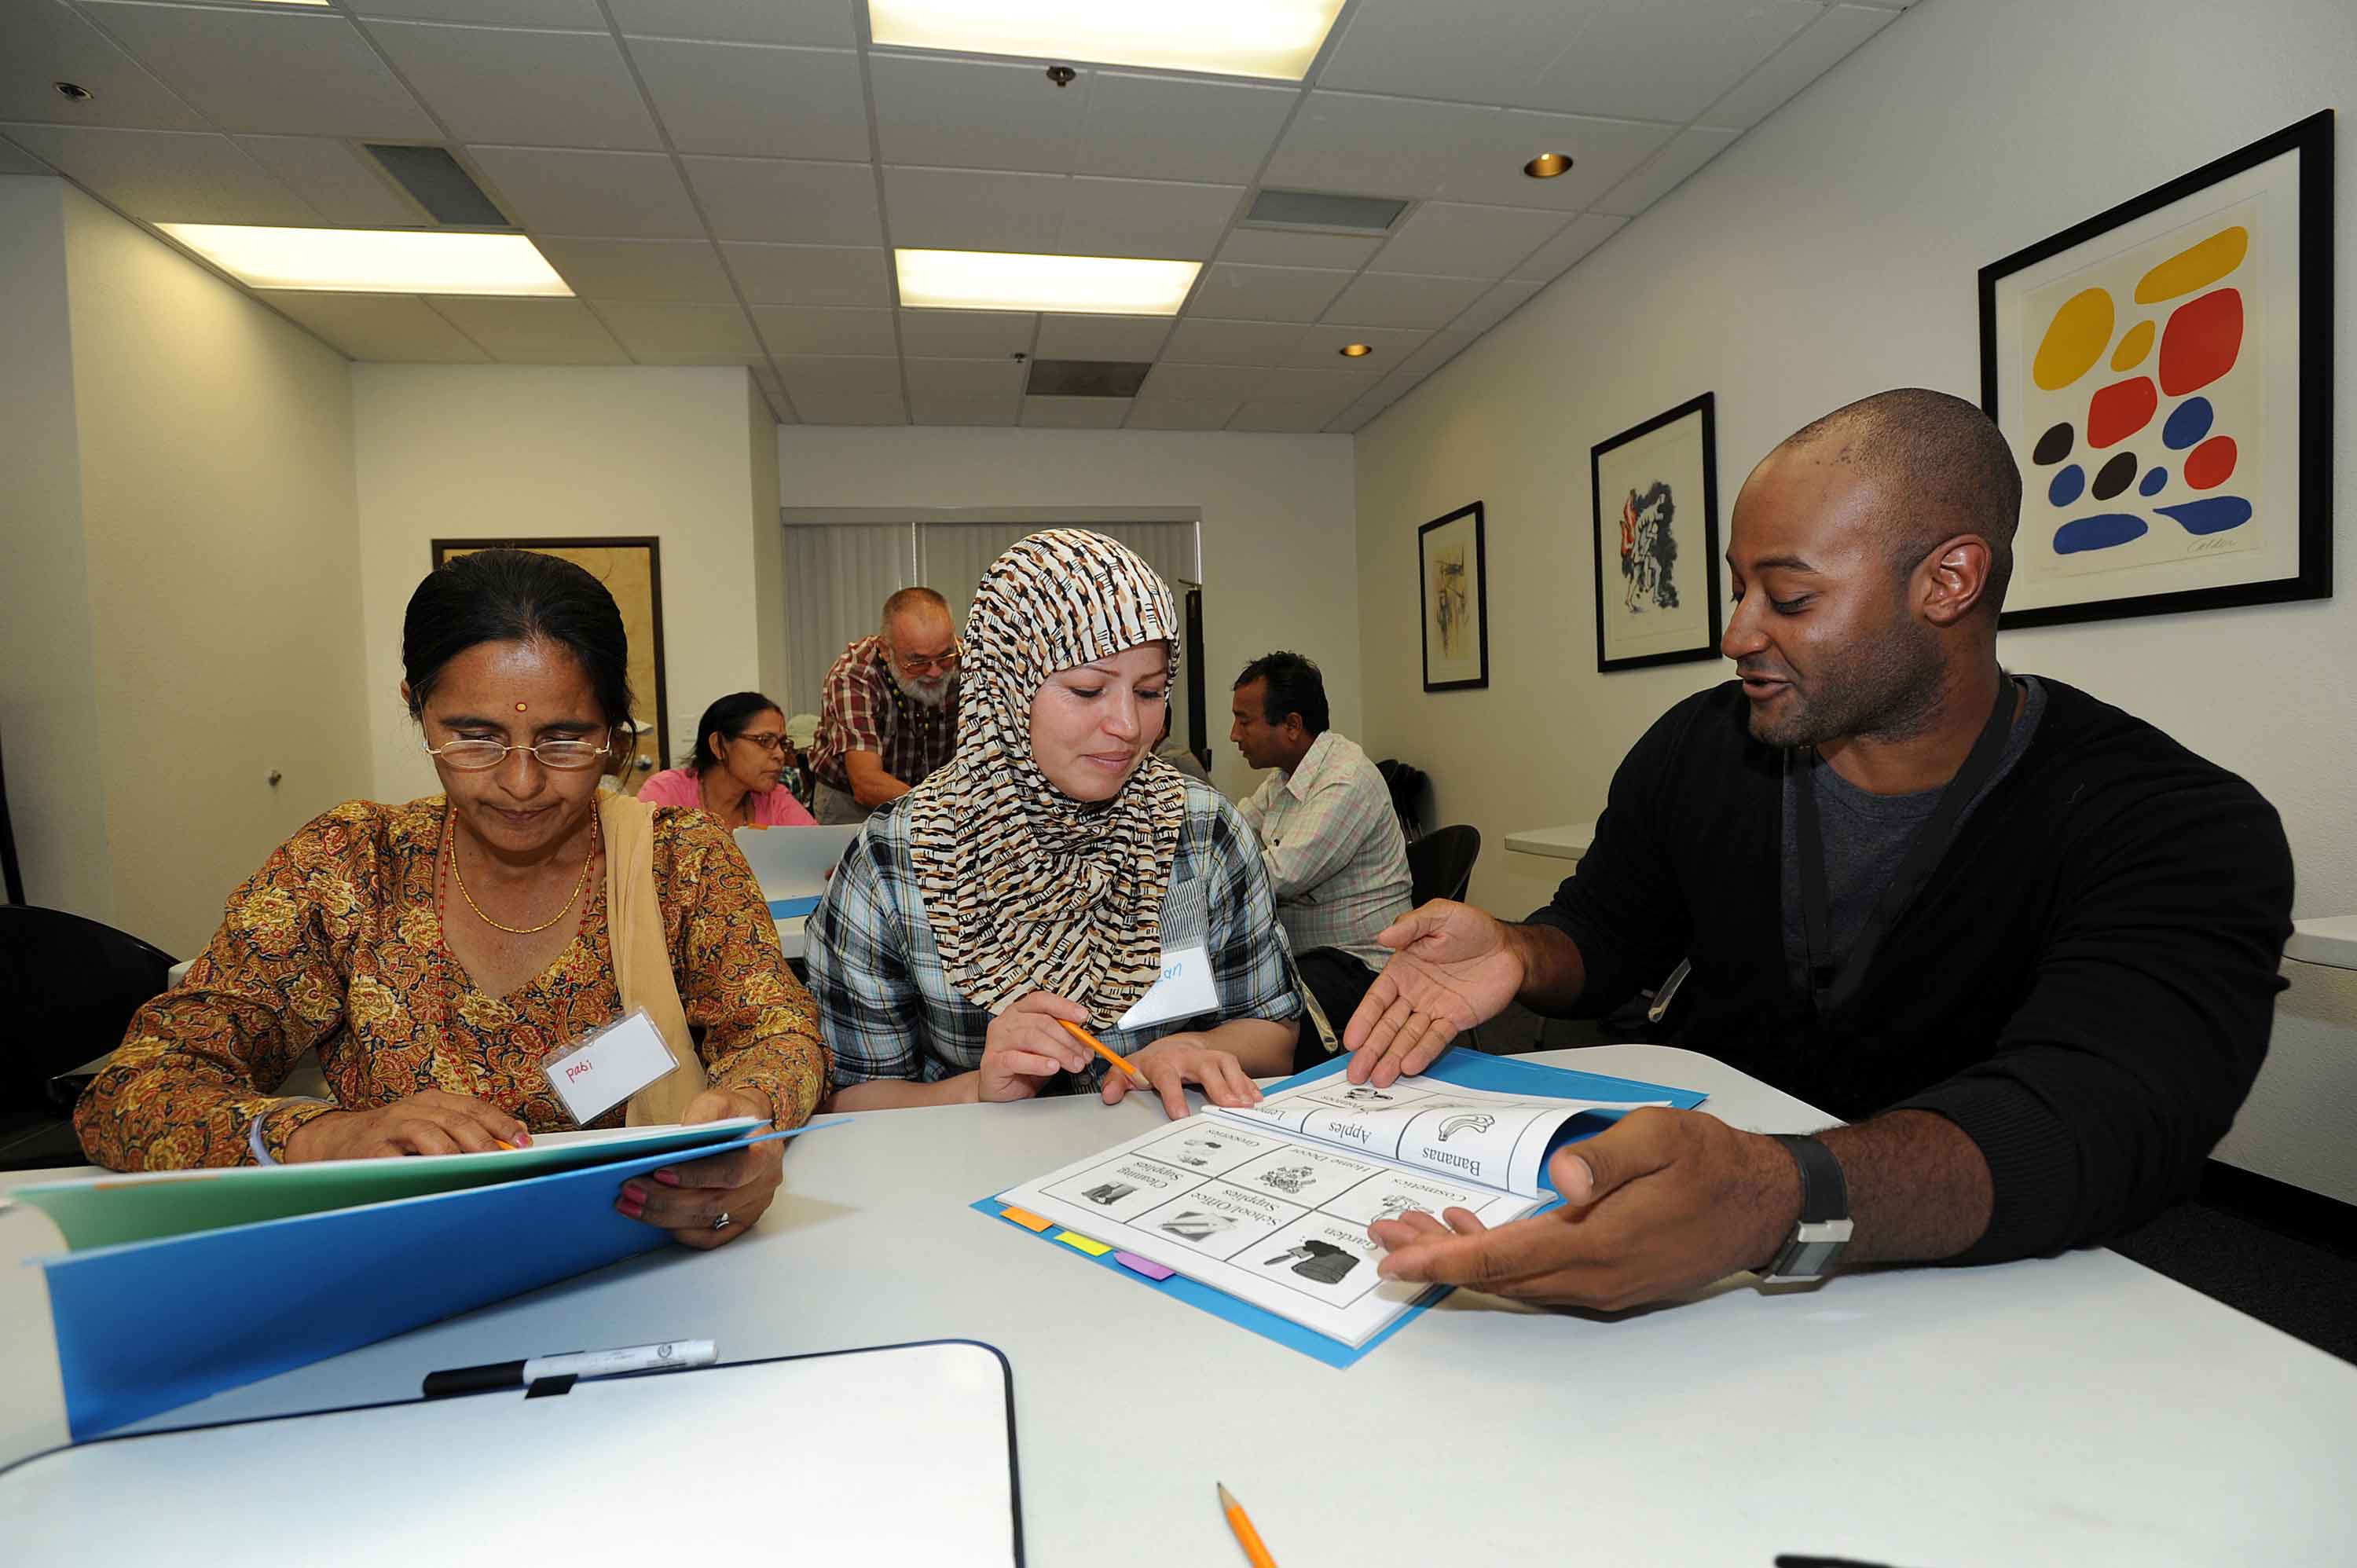 CO provider leading refugees through cultural adjustment materials